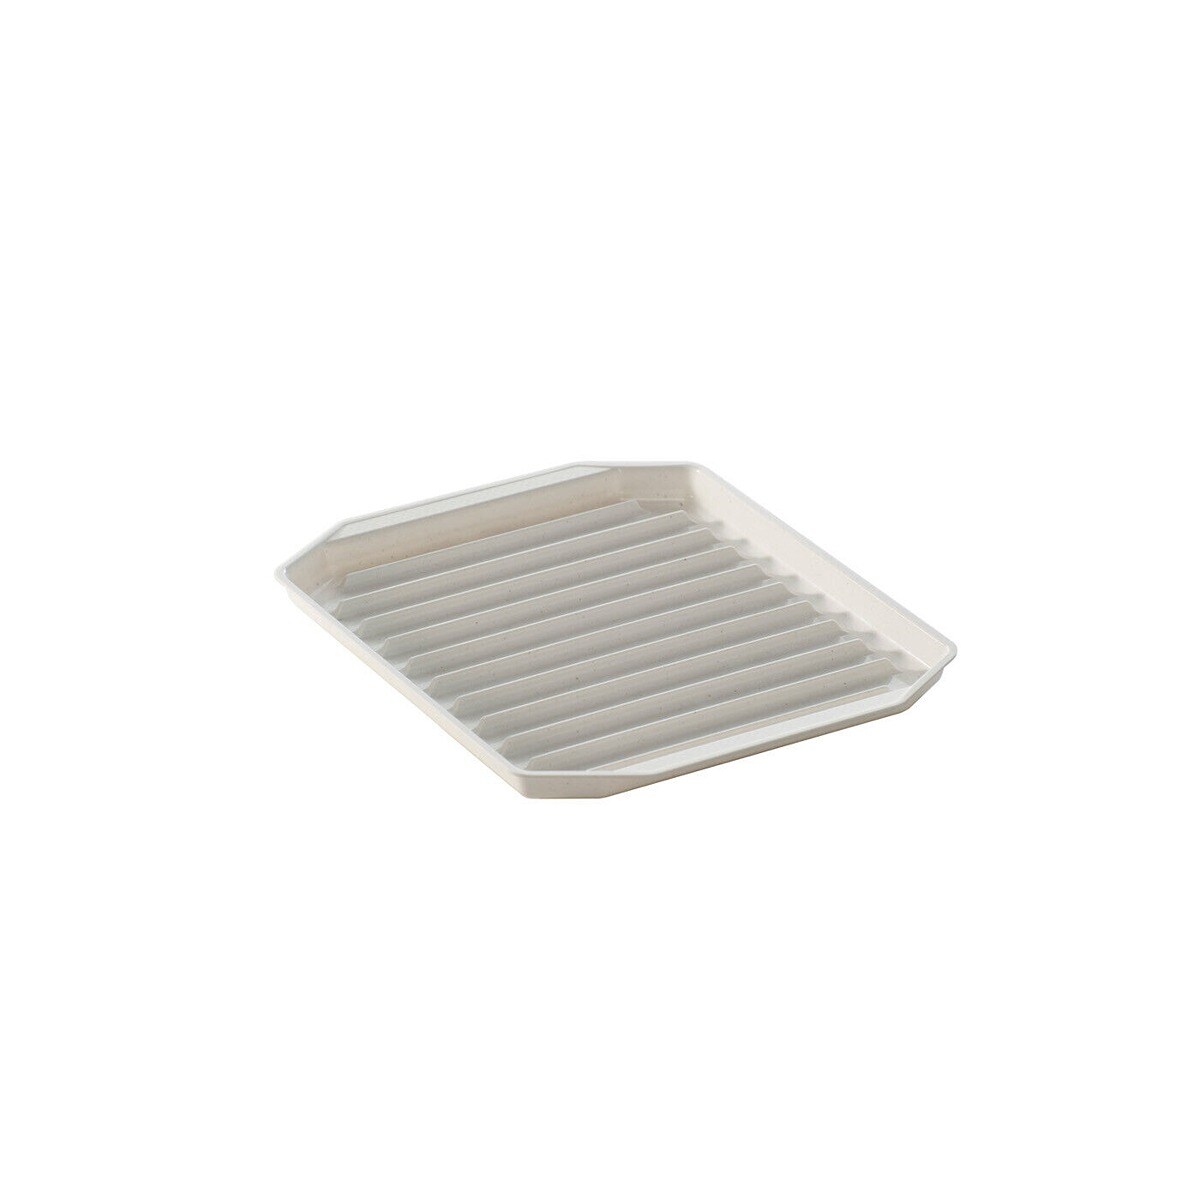 Nordic Ware Microwaveable Compact Bacon Tray with Lid